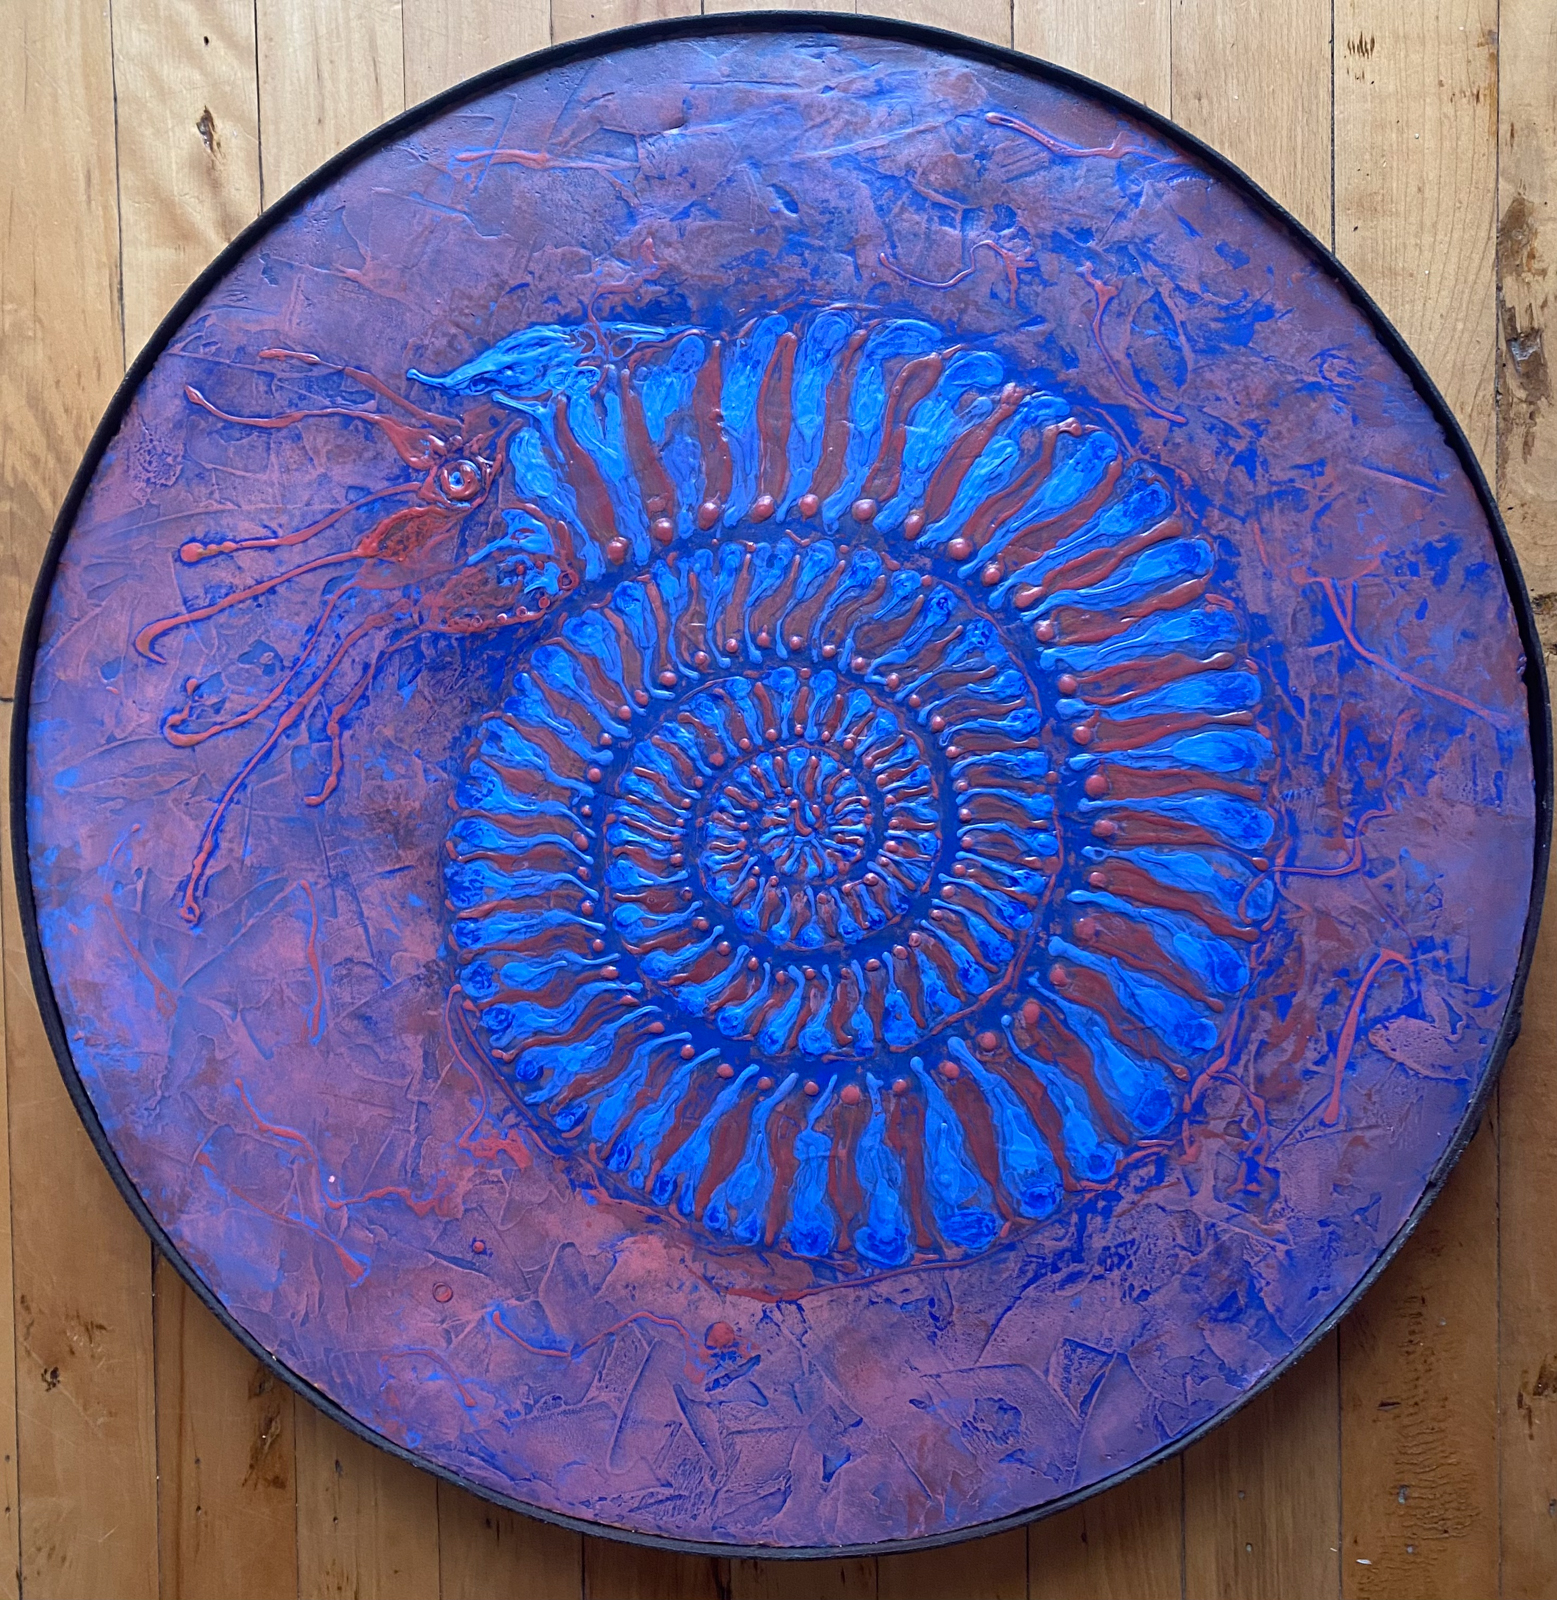 This rendering of an ammonite fossil vibrates with the juxtaposition of blue and red tones. Delicate background texture creates volume and an almost 3-D effect. His detailed and intimate knowledge of the natural world is revealed in this carefully painted image.